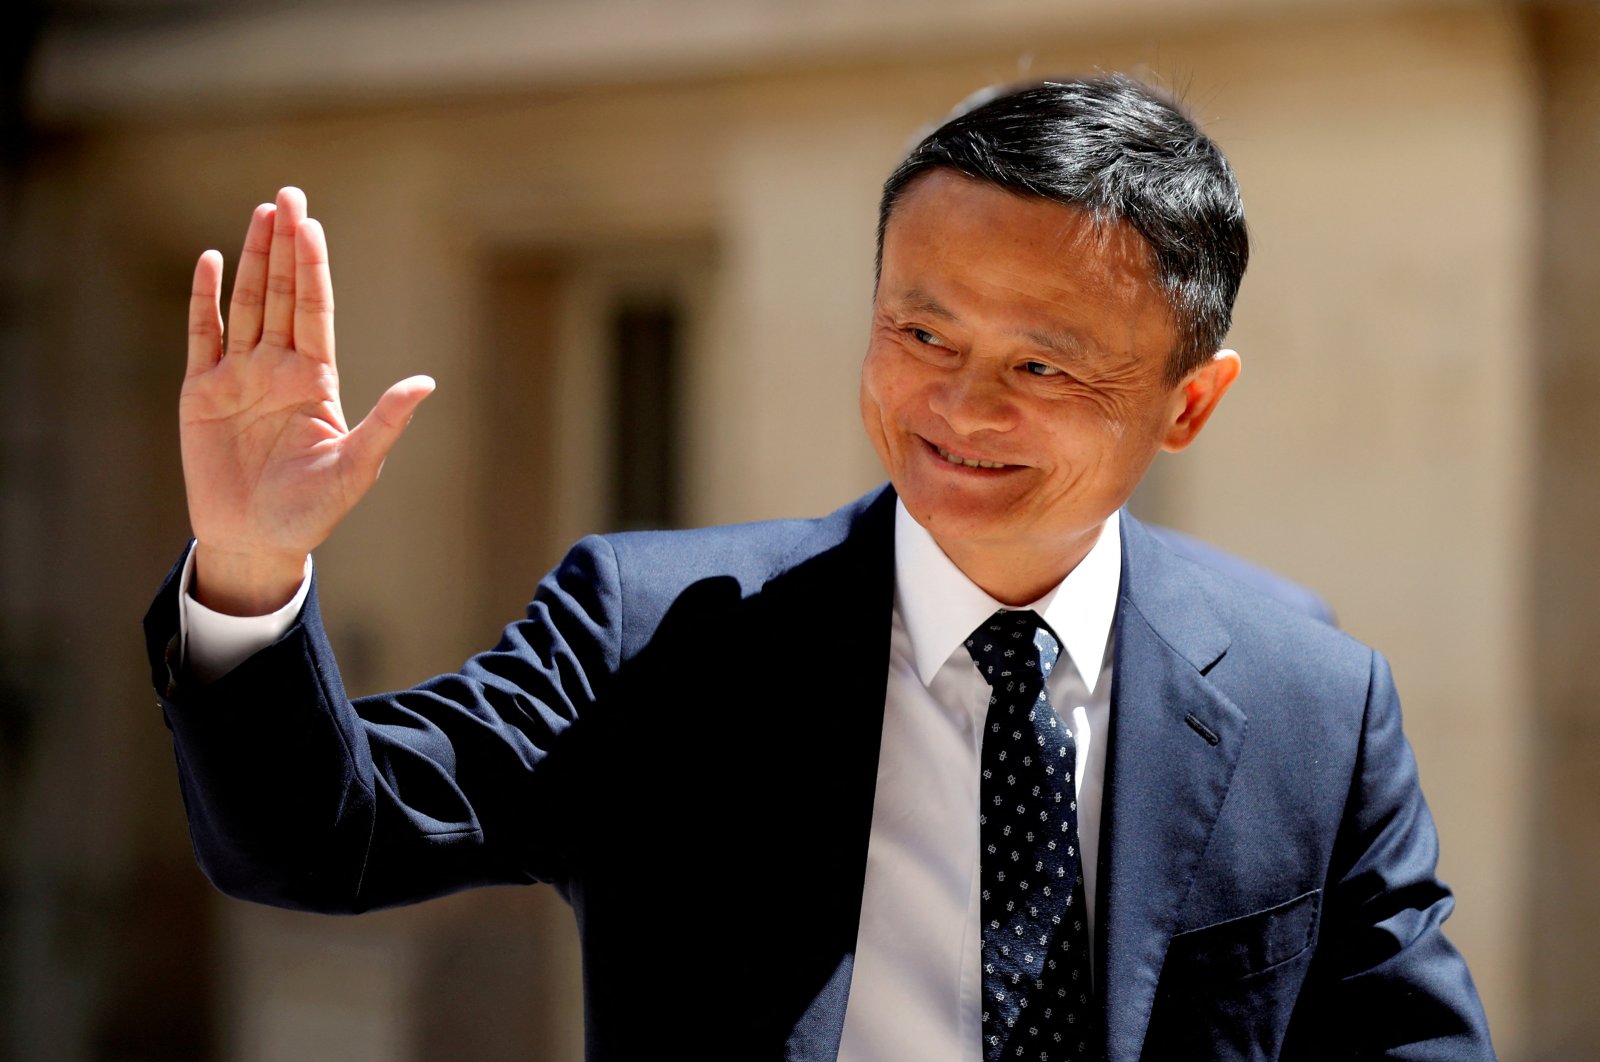 Jack Ma, billionaire founder of Alibaba Group, arrives at the &quot;Tech for Good&quot; Summit in Paris, France, May 15, 2019. (Reuters Photo)